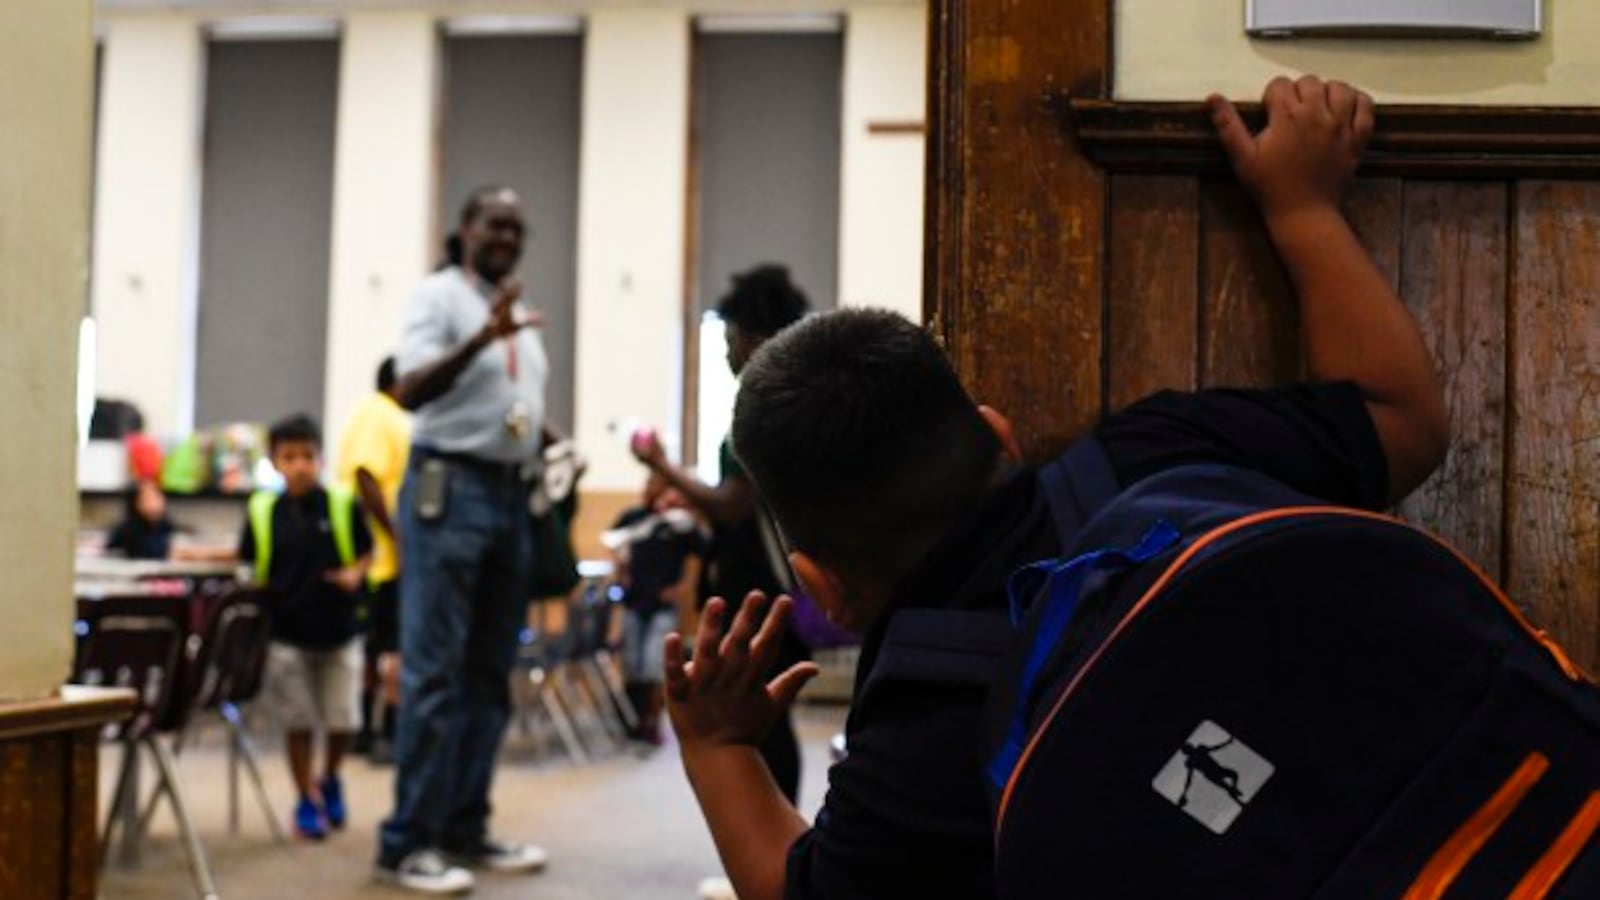 Sebastian Cruz waves to Rev. Leon Kelly as he works with children in a classroom during his after-school program at Wyatt Academy in September 2018.